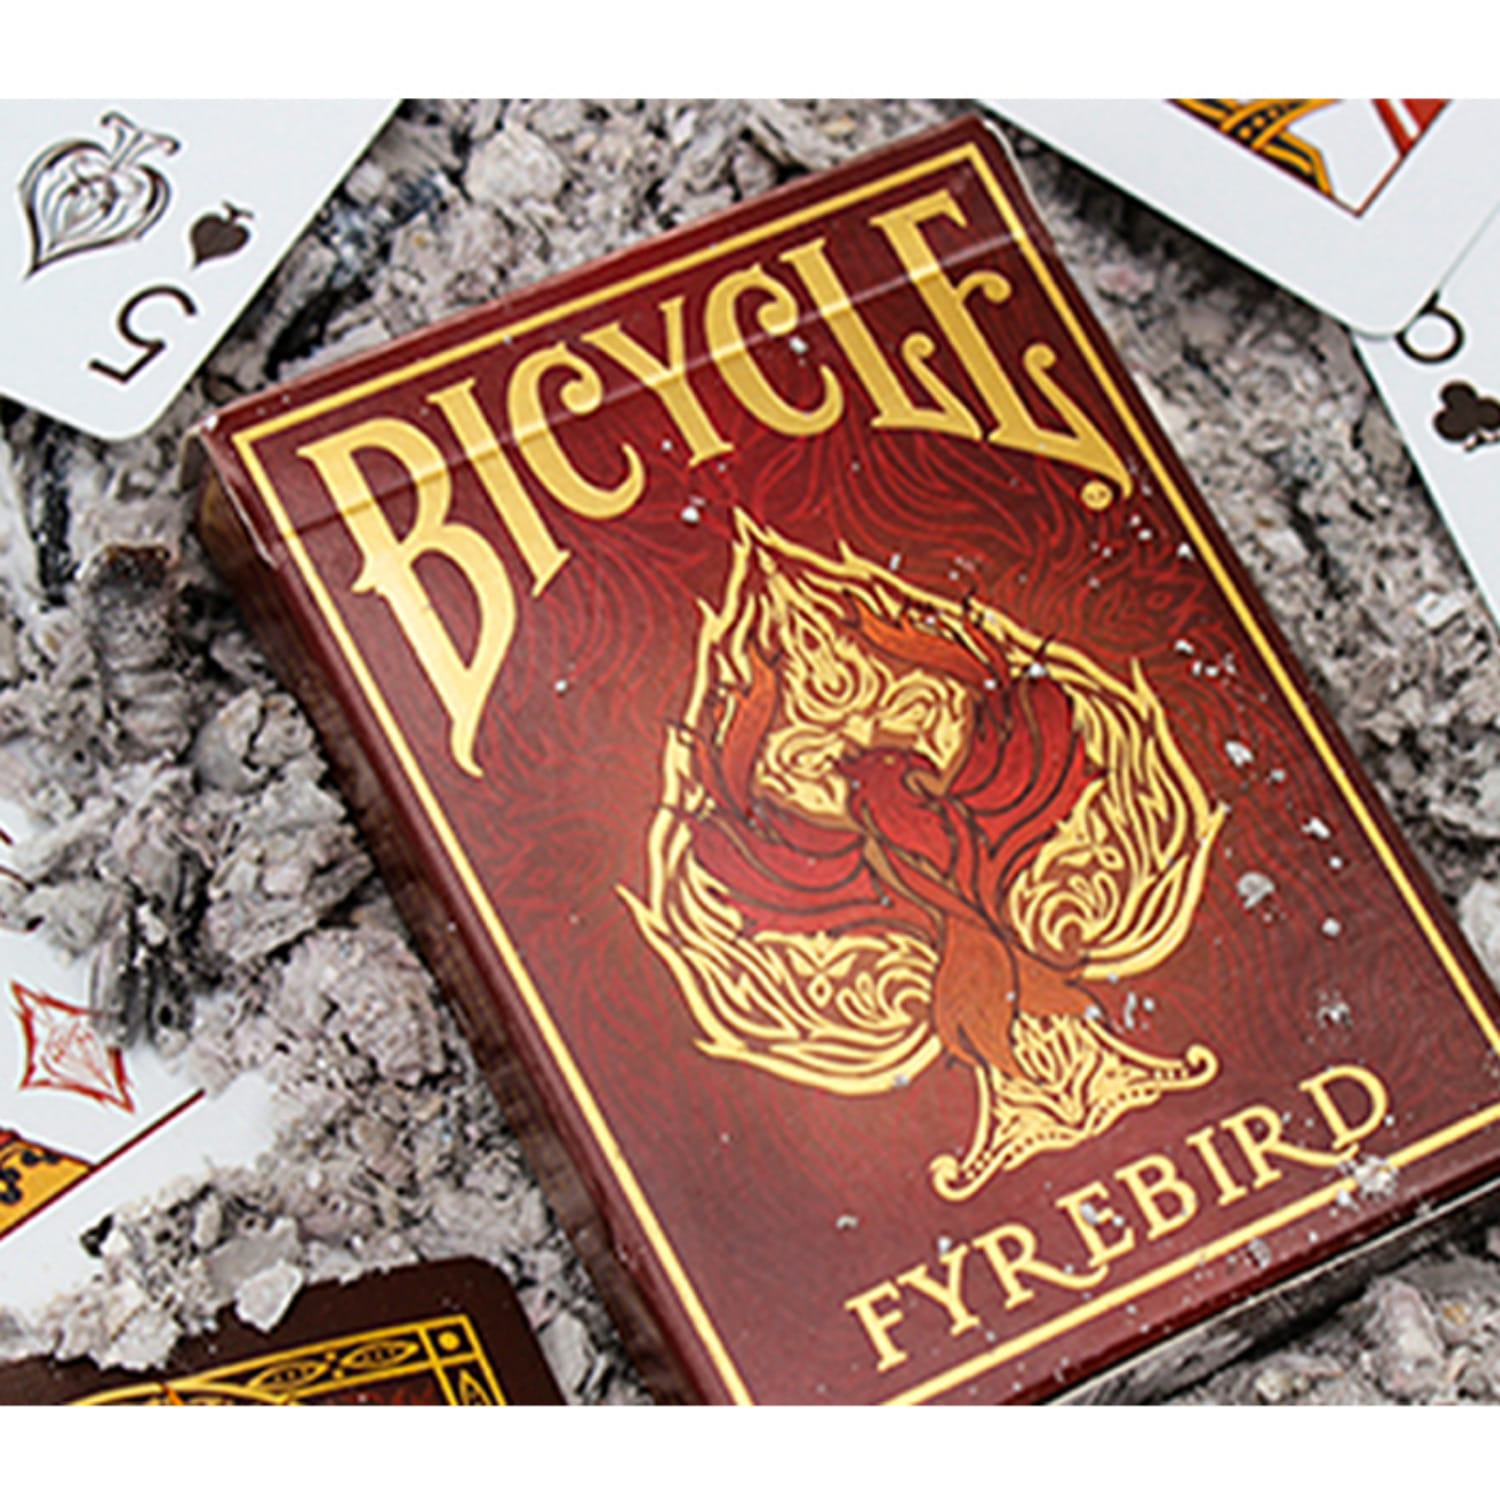 Bicycle Fyrebird Playing Cards  (partyn)